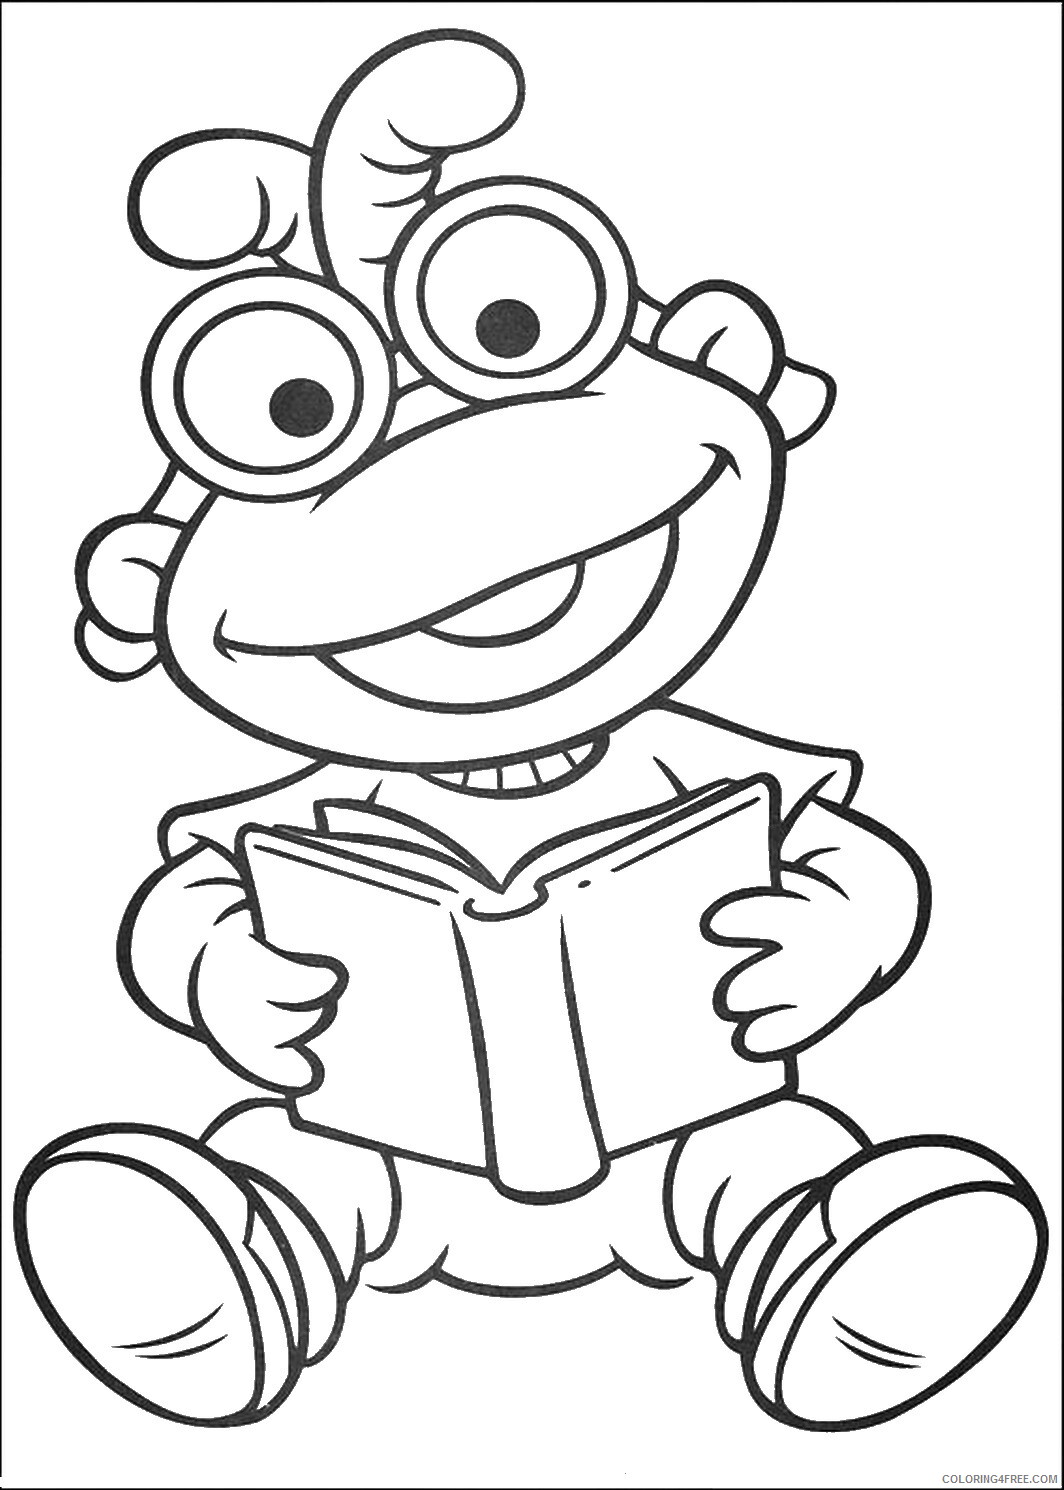 The Muppet Show Coloring Pages TV Film muppets_cl_25 Printable 2020 09384 Coloring4free